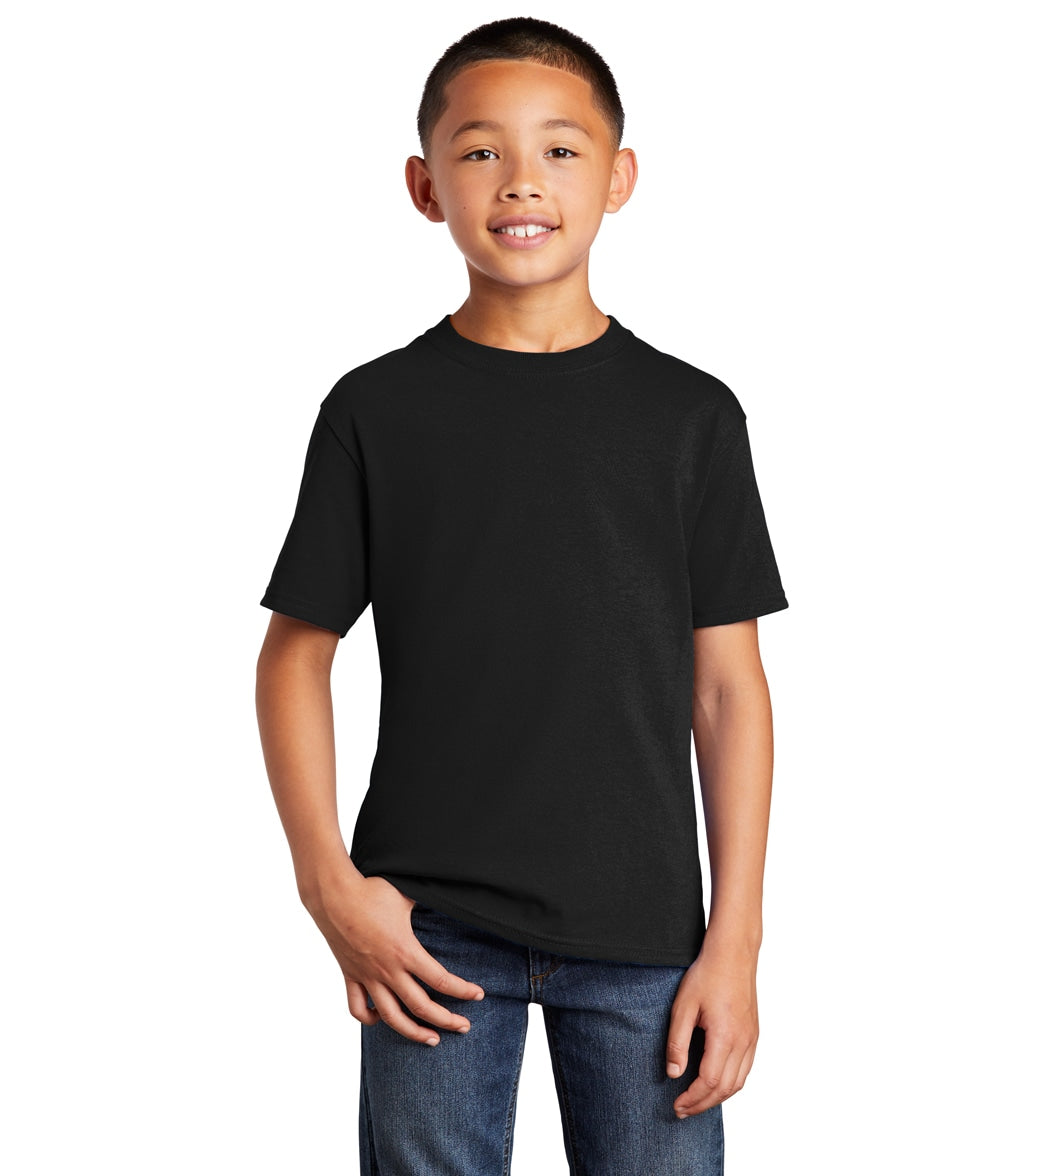 SwimOutlet Youth Core Cotton Short Sleeve Tee